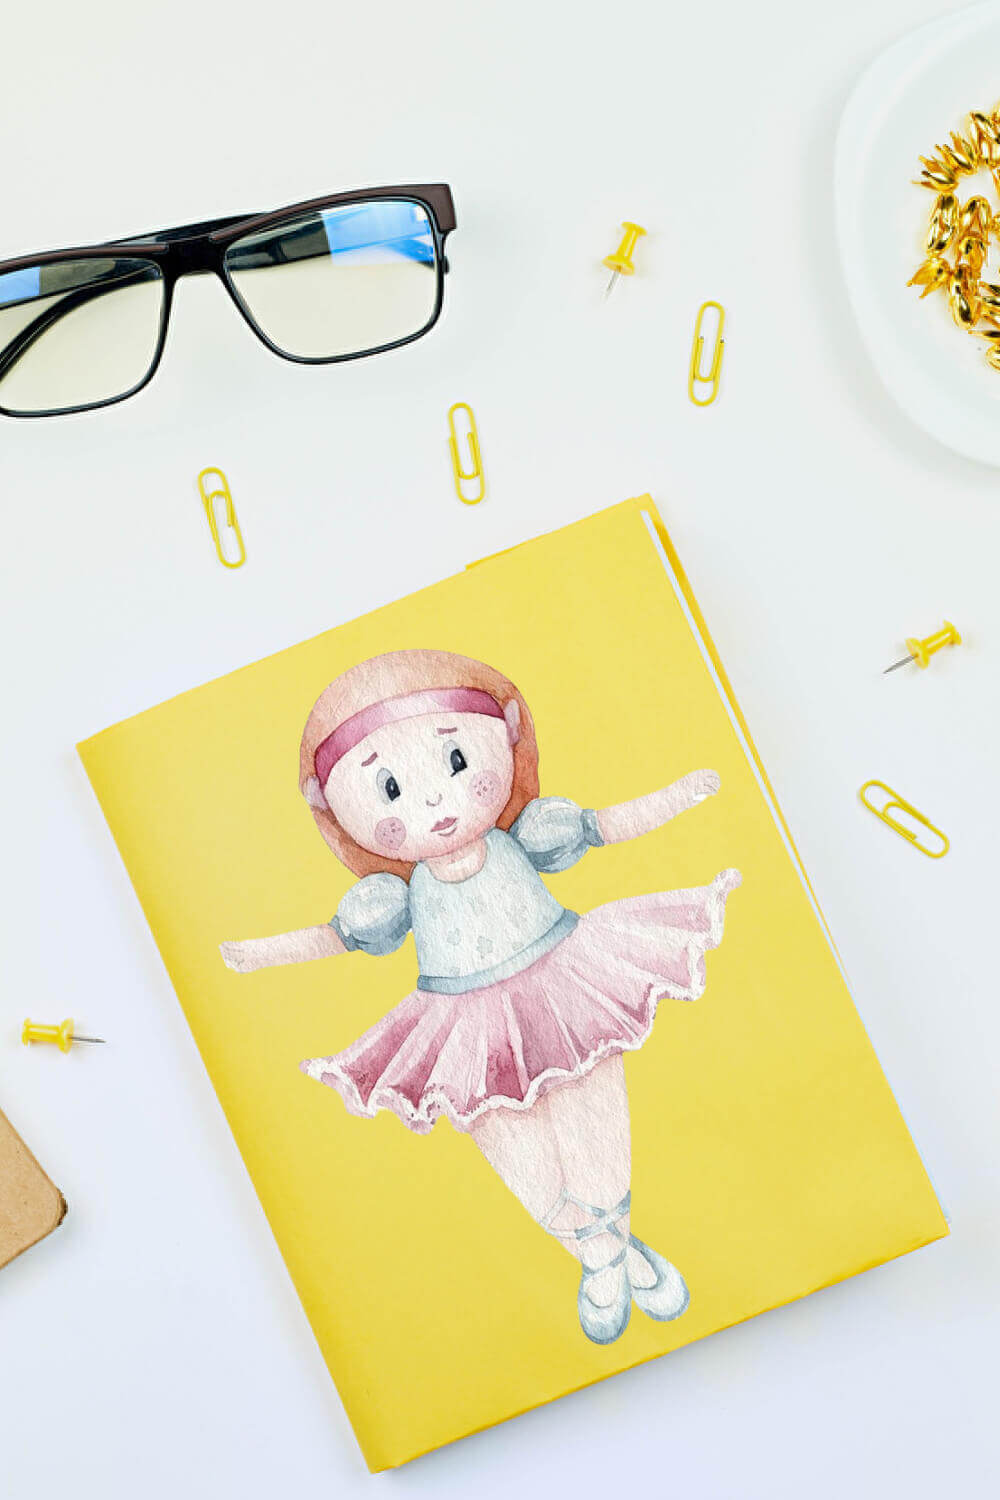 Yellow postcard with a drawn ballerina on it.